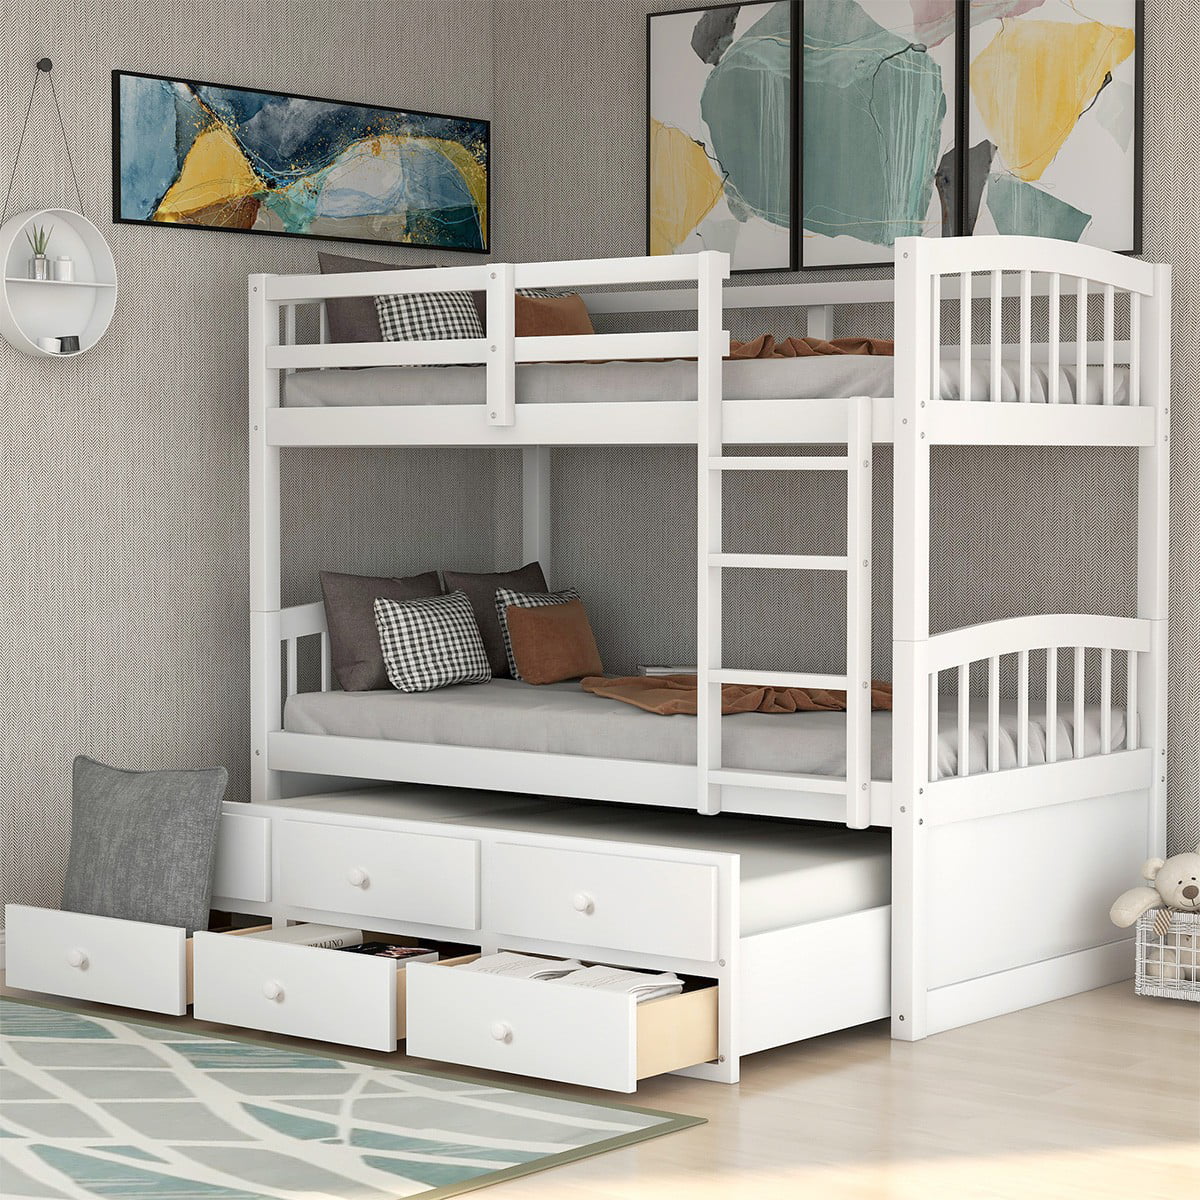 Modernluxe Twin Over Twin Bunk Bed With Trundle And Storage Drawers For